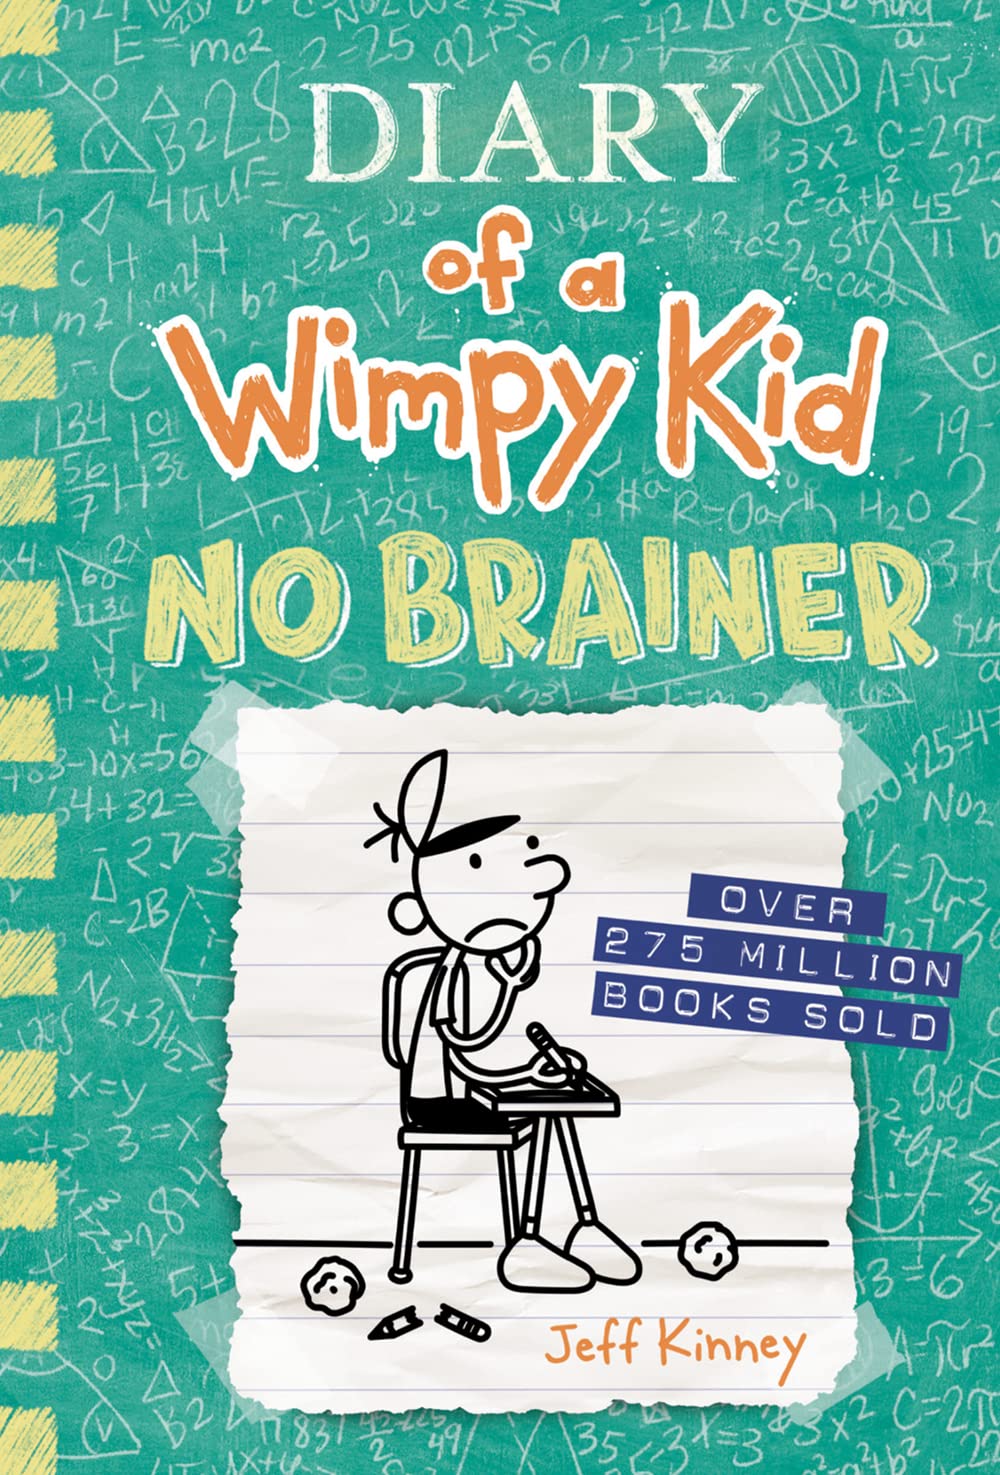 Diary of a Wimpy Kid No Brainer Diary of a Wimpy Kid Wiki Fandom